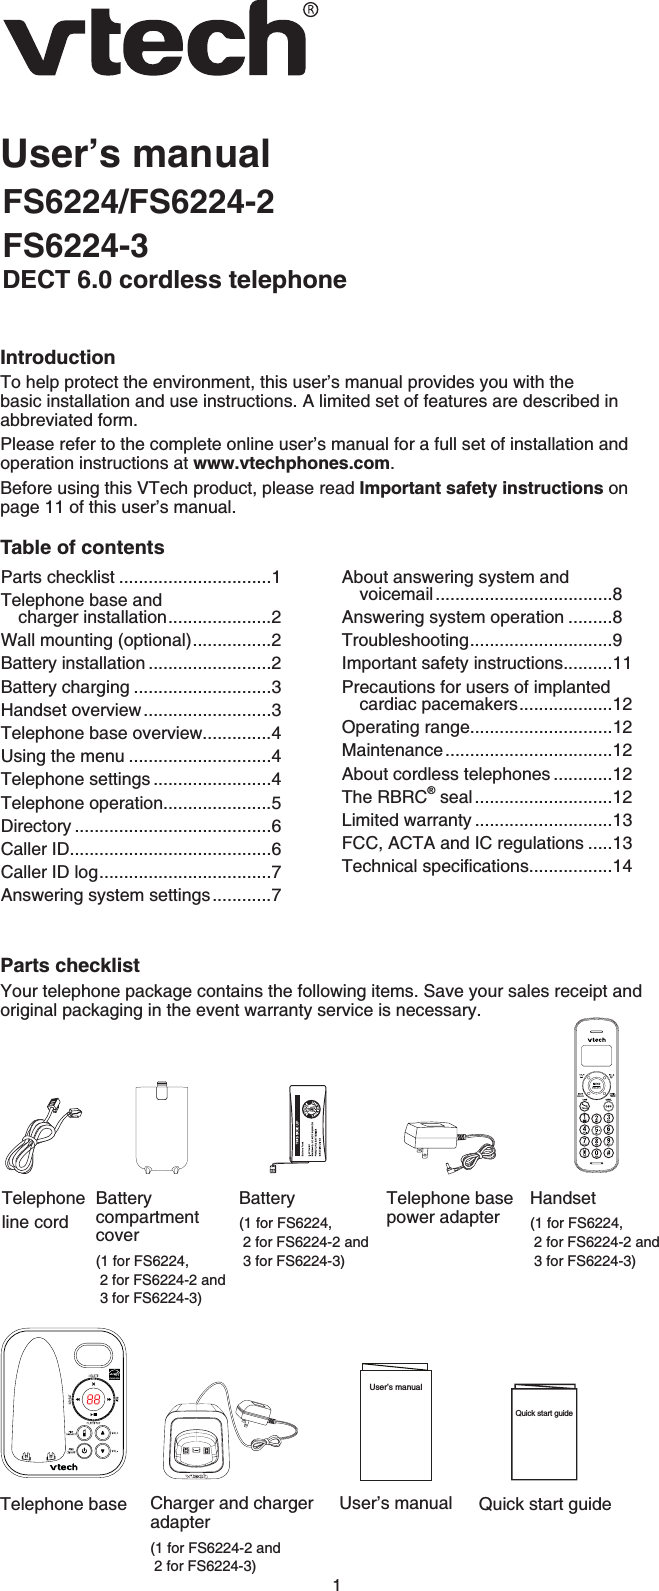 1User’s manualFS6224/FS6224-2FS6224-3DECT 6.0 cordless telephoneIntroductionTo help protect the environment, this user’s manual provides you with the basic installation and use instructions. A limited set of features are described in abbreviated form.Please refer to the complete online user’s manual for a full set of installation and operation instructions at www.vtechphones.com.Before using this VTech product, please read Important safety instructions on page 11 of this user’s manual.Table of contentsParts checklistYour telephone package contains the following items. Save your sales receipt and original packaging in the event warranty service is necessary.Parts checklist ...............................1Telephone base and charger installation.....................2Wall mounting (optional)................2Battery installation .........................2Battery charging ............................3Handset overview..........................3Telephone base overview..............4Using the menu .............................4Telephone settings ........................4Telephone operation......................5Directory ........................................6Caller ID.........................................6Caller ID log...................................7Answering system settings............7About answering system and voicemail....................................8Answering system operation .........8Troubleshooting.............................9Important safety instructions..........11Precautions for users of implanted cardiac pacemakers...................12Operating range.............................12Maintenance..................................12About cordless telephones ............12The RBRC® seal ............................12Limited warranty ............................13FCC, ACTA and IC regulations .....136GEJPKECNURGEKſECVKQPU.................14Battery(1 for FS6224,2 for FS6224-2 and3 for FS6224-3)User’s manualUser’s manualTelephone base power adapterTelephoneline cordQuick start guideQuick start guideCharger and charger adapter(1 for FS6224-2 and2 for FS6224-3)Batterycompartmentcover(1 for FS6224,2 for FS6224-2 and3 for FS6224-3) Handset(1 for FS6224,2 for FS6224-2 and3 for FS6224-3)Telephone base